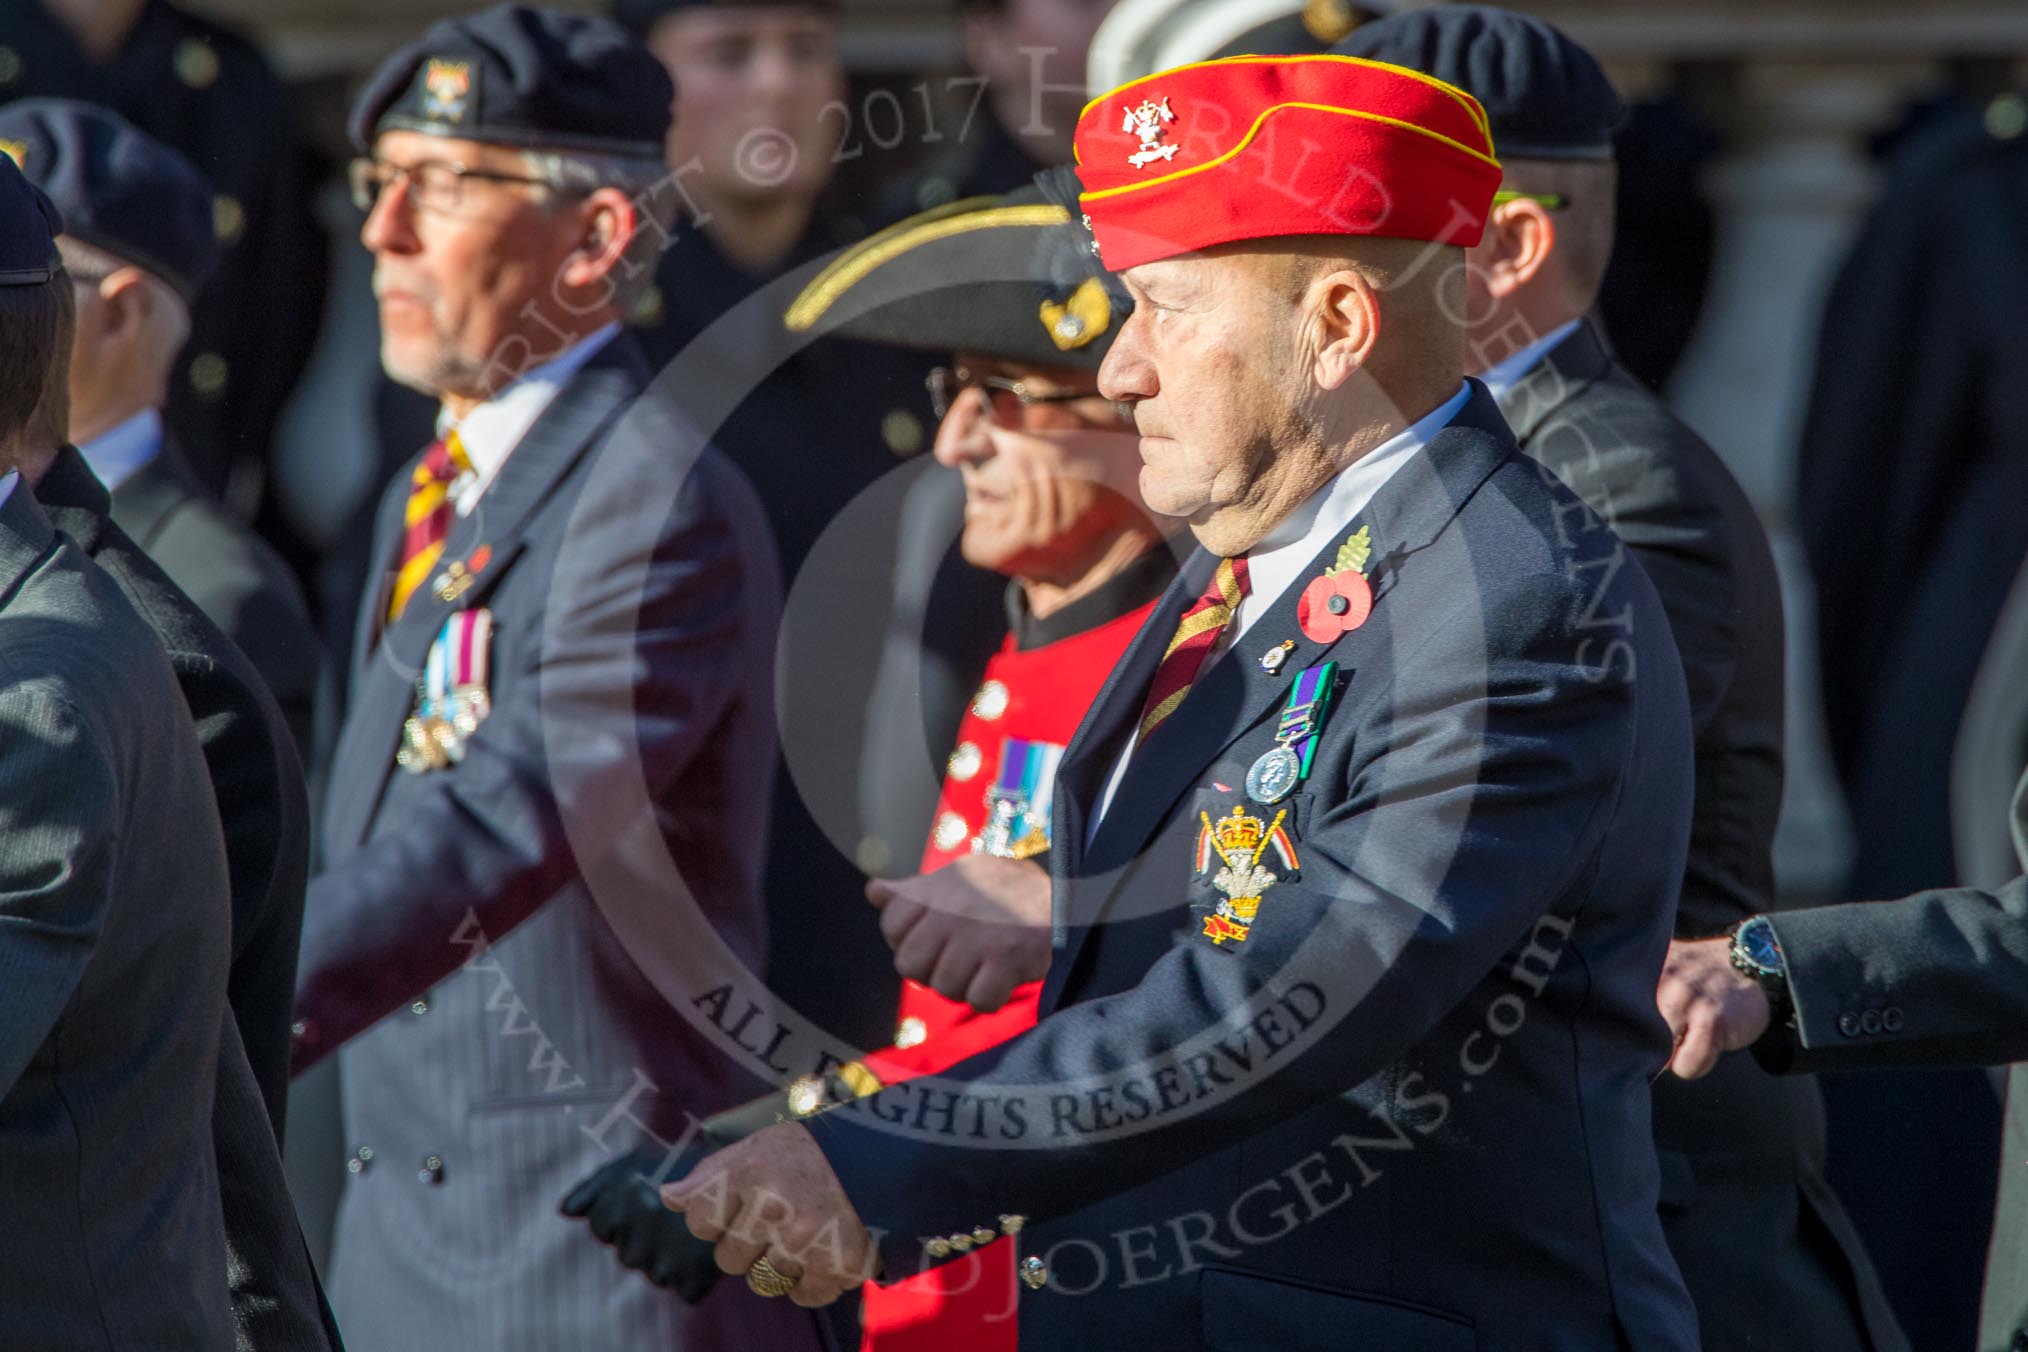 The Royal Lancers (Group B22, 24 members) during the Royal British Legion March Past on Remembrance Sunday at the Cenotaph, Whitehall, Westminster, London, 11 November 2018, 12:10.